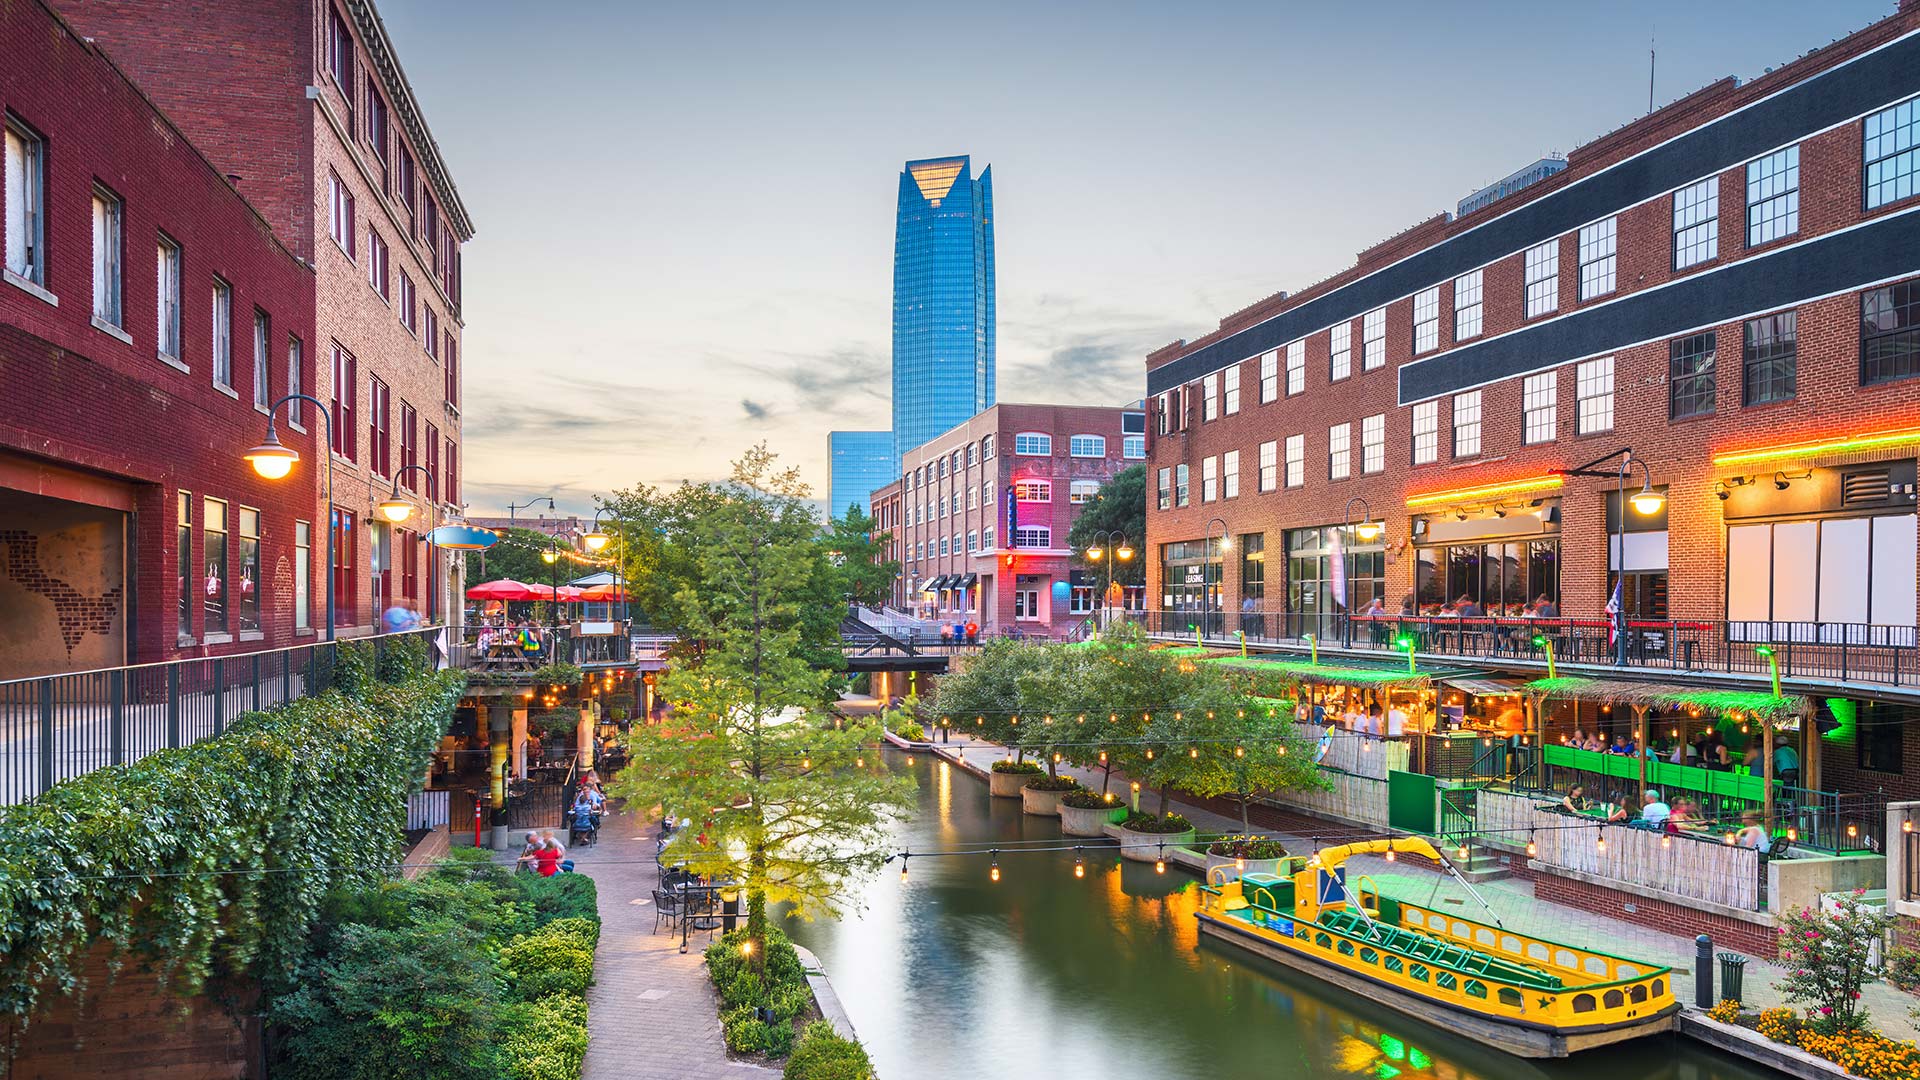 Waterfront canal in Oklahoma City with restaurants and sidewalks lining it at dusk.